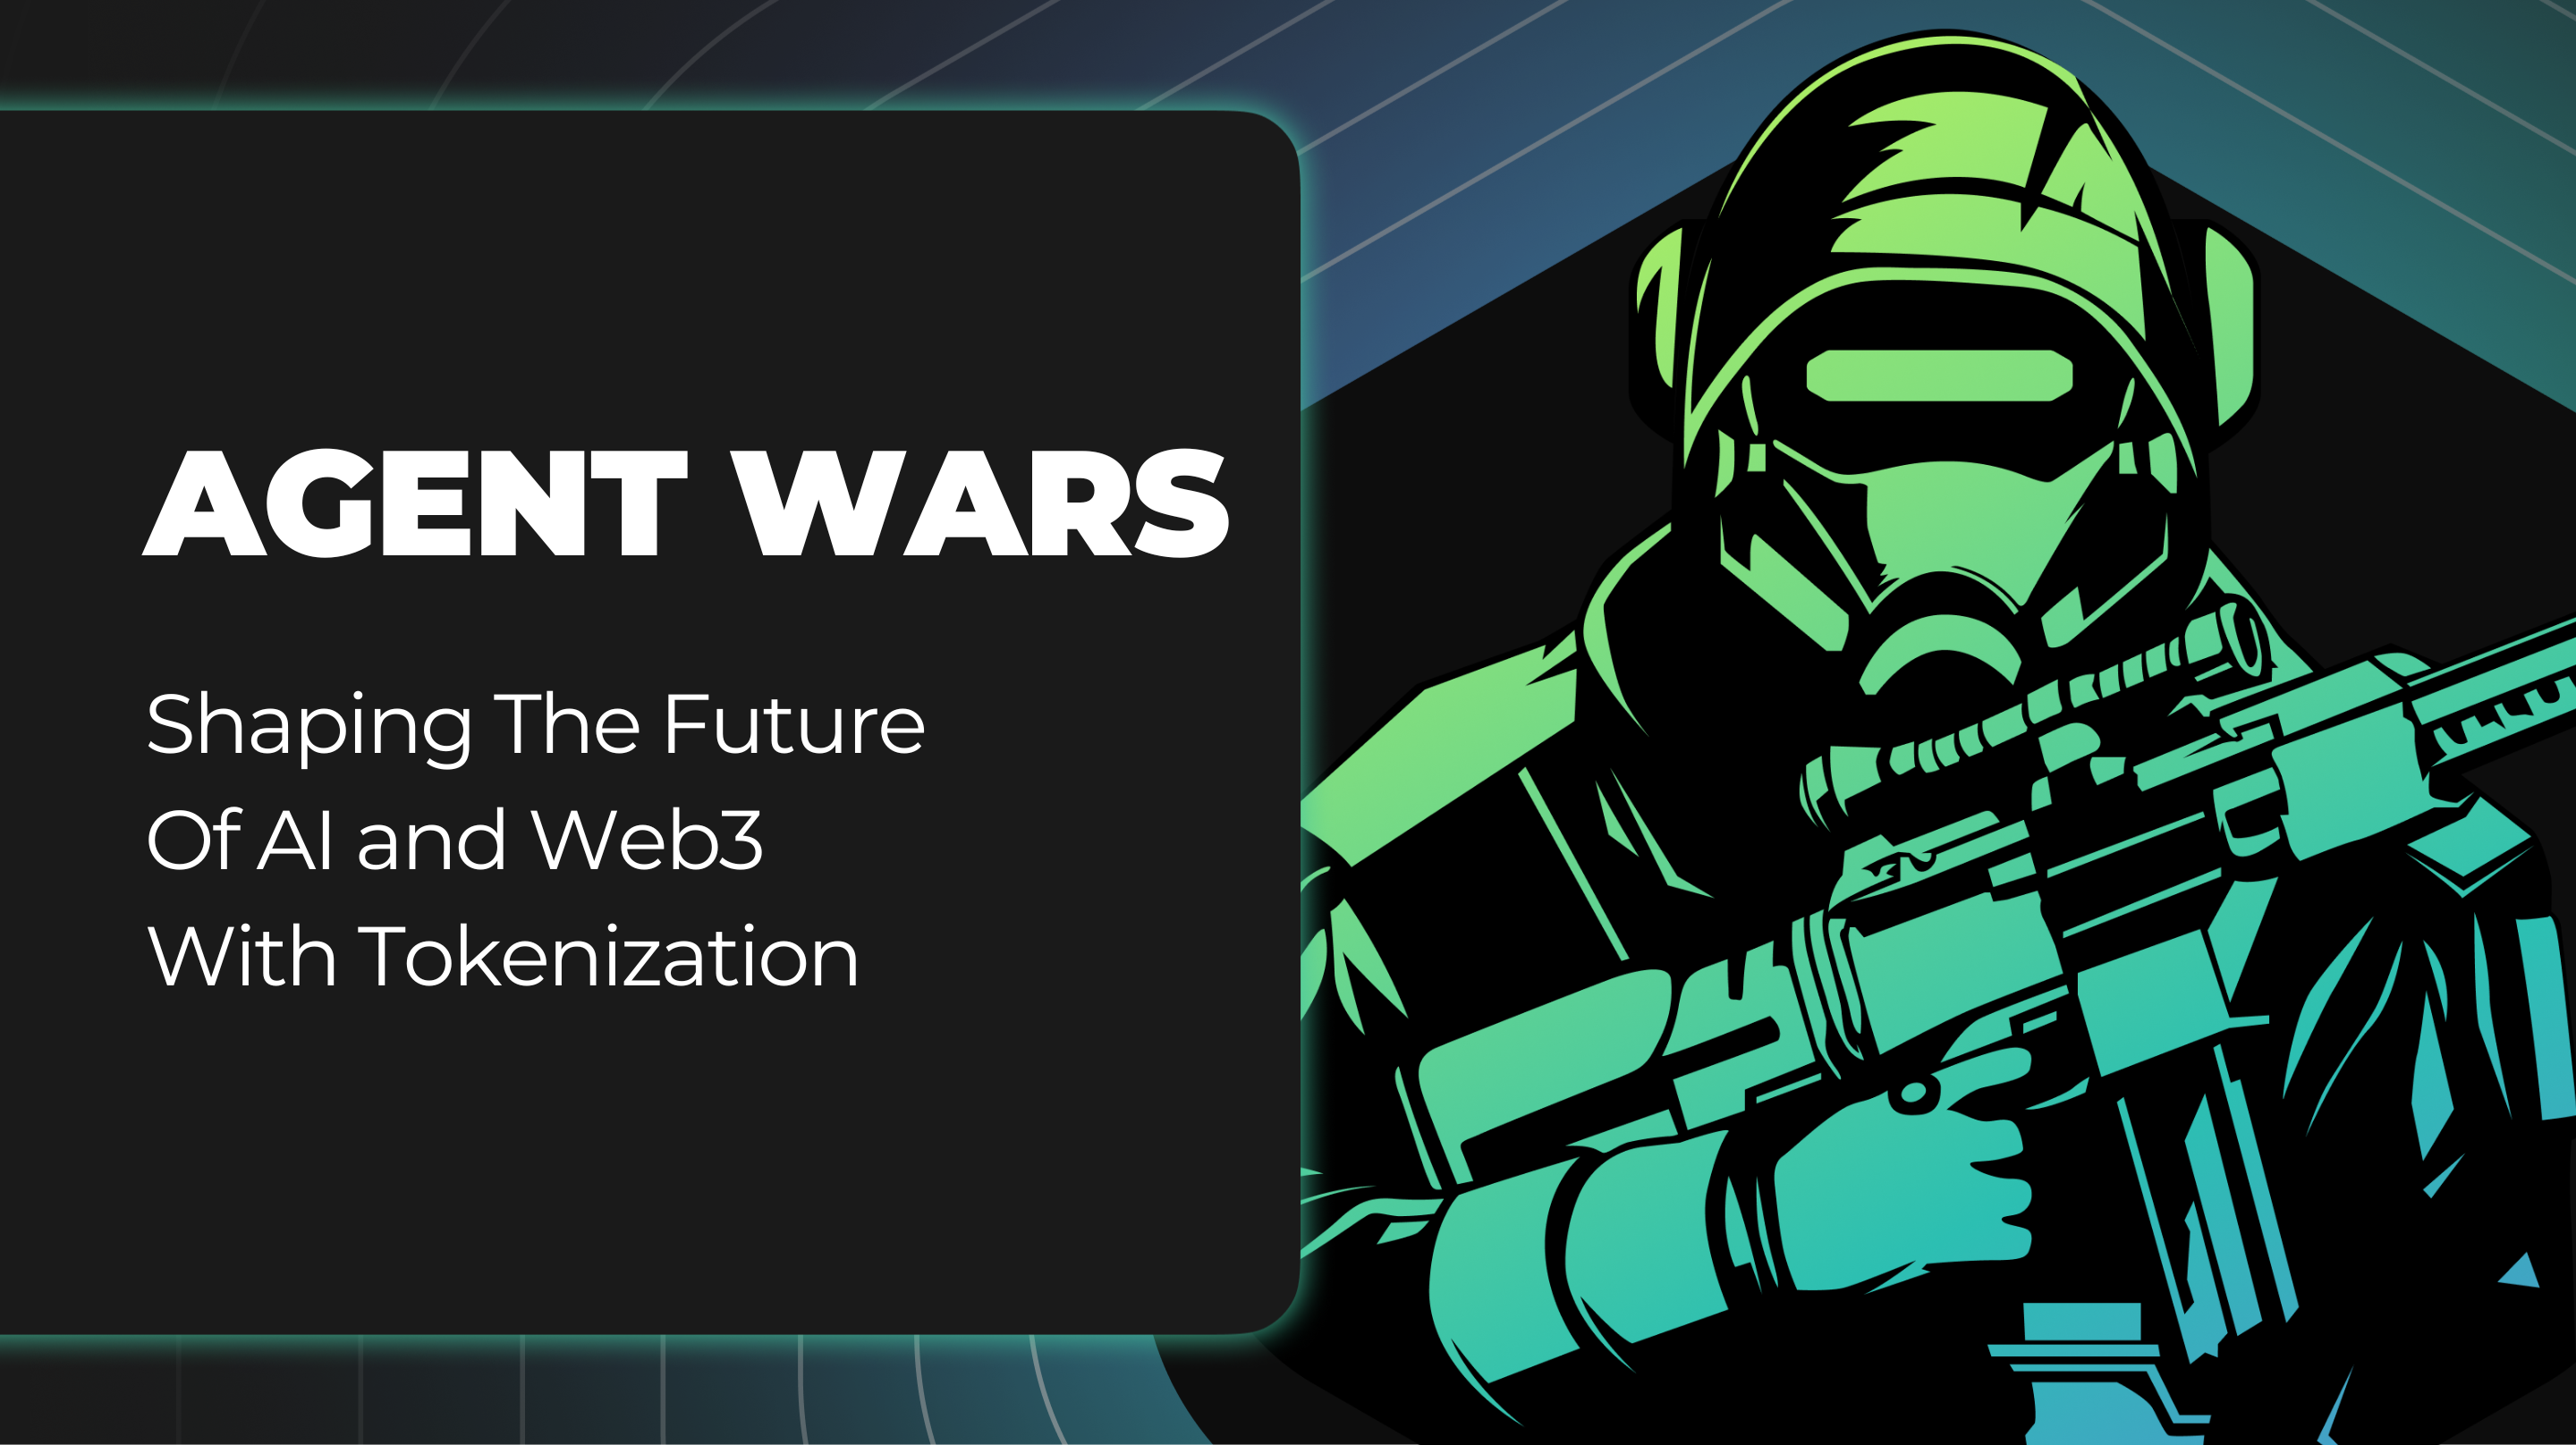 Agent Wars: Shaping the Future of AI and Web3 with Tokenization